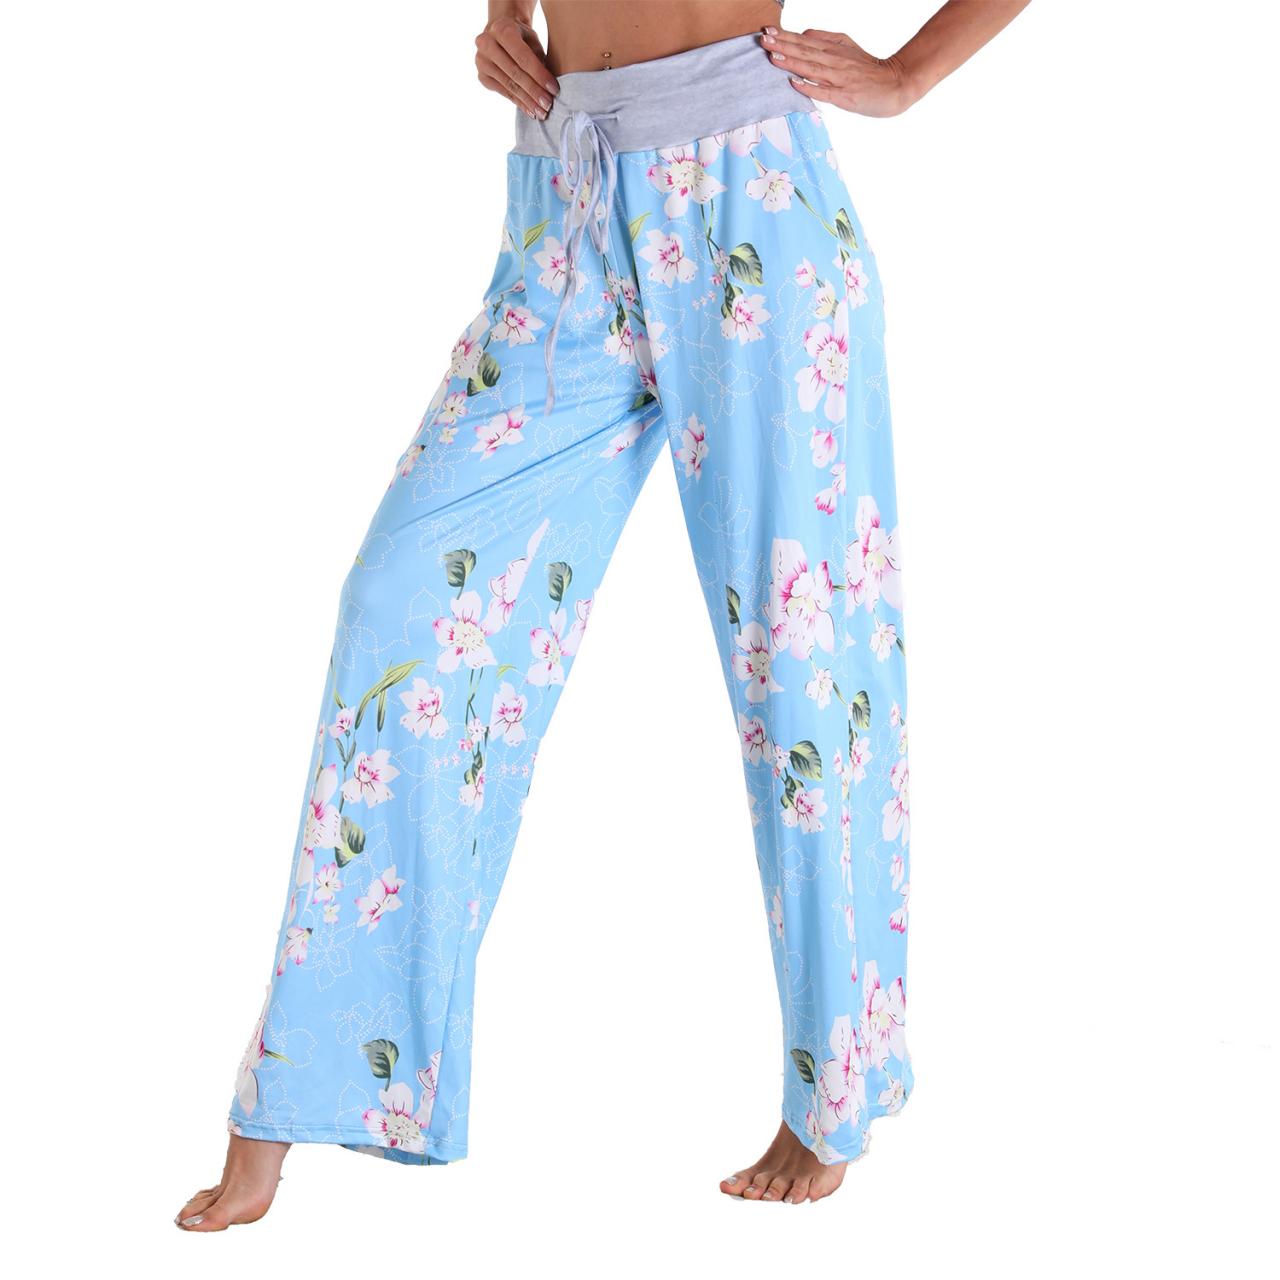 Leisure Sports Workout Gym Fitness Women Casual Pajamas Elastic Pocket Trousers Loose Fit Strap Blue Floral Printed Pants